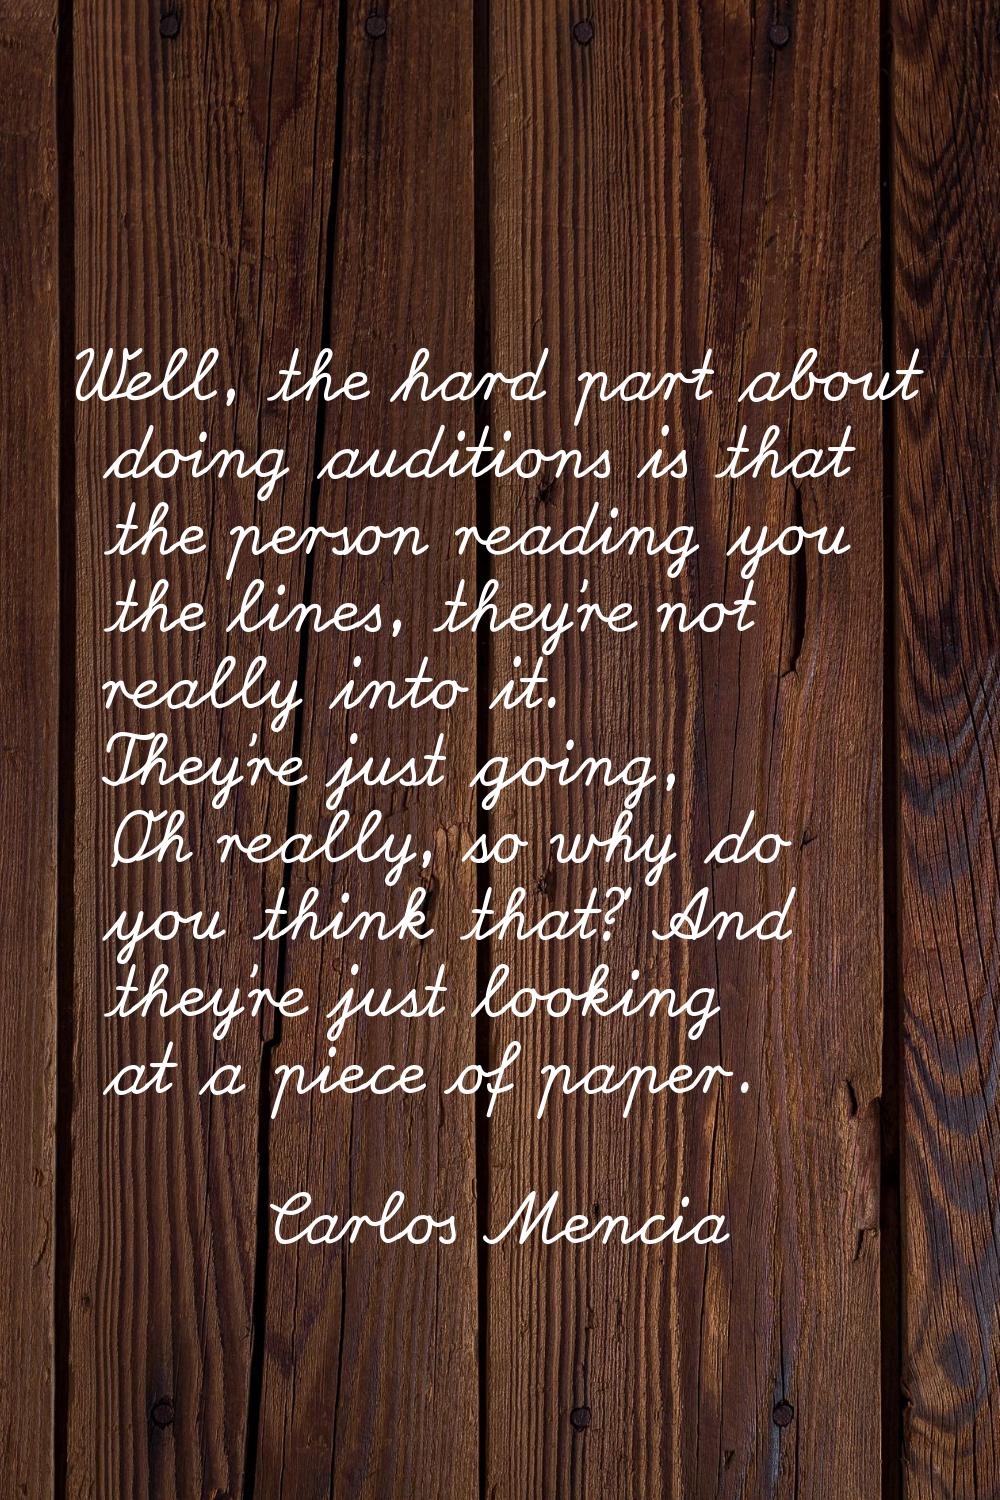 Well, the hard part about doing auditions is that the person reading you the lines, they're not rea